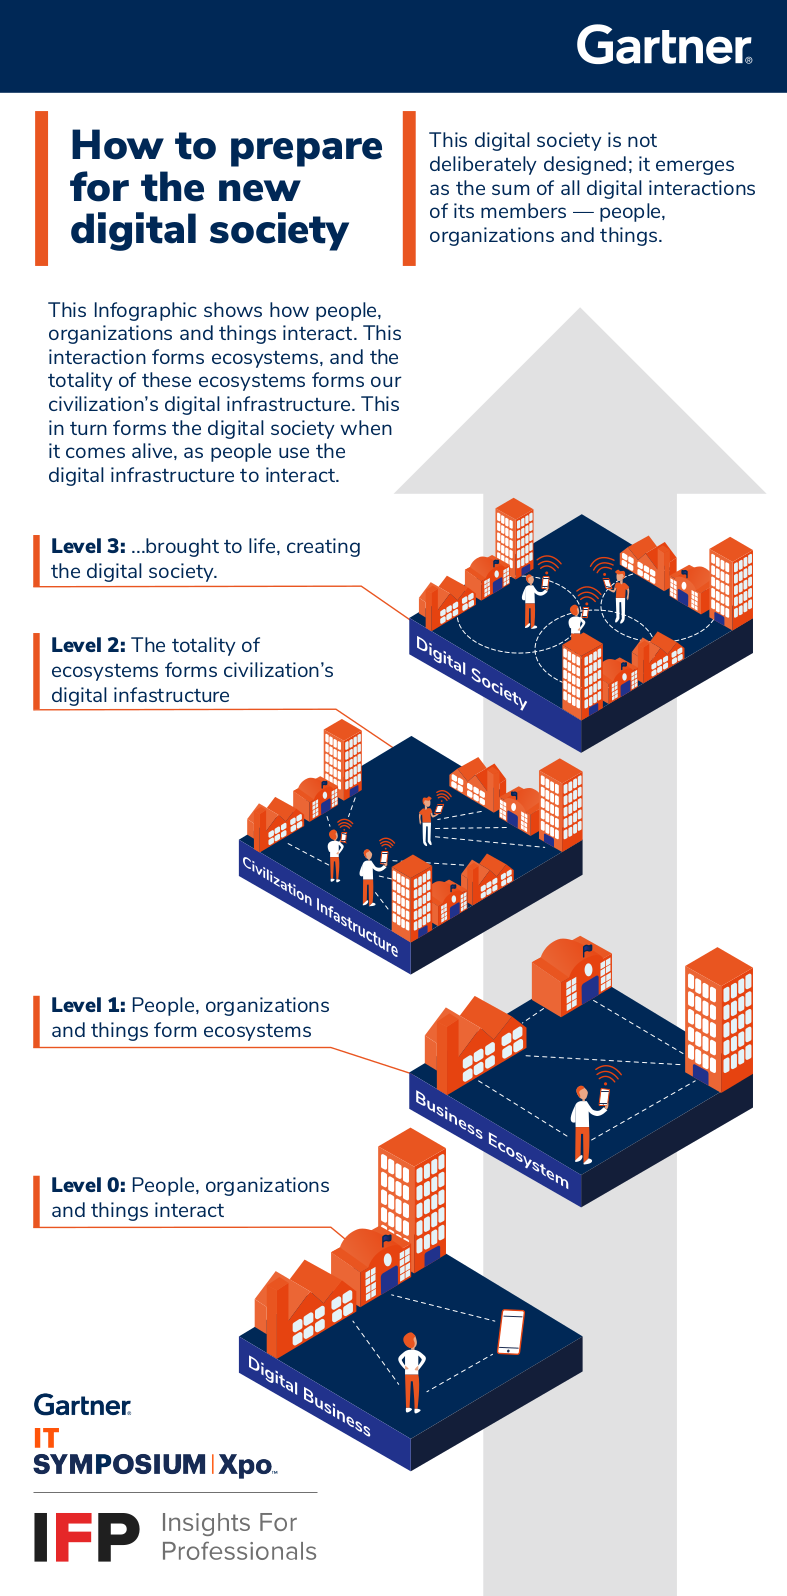 Gartner infographic shows business leaders how to prepare for the new digital society